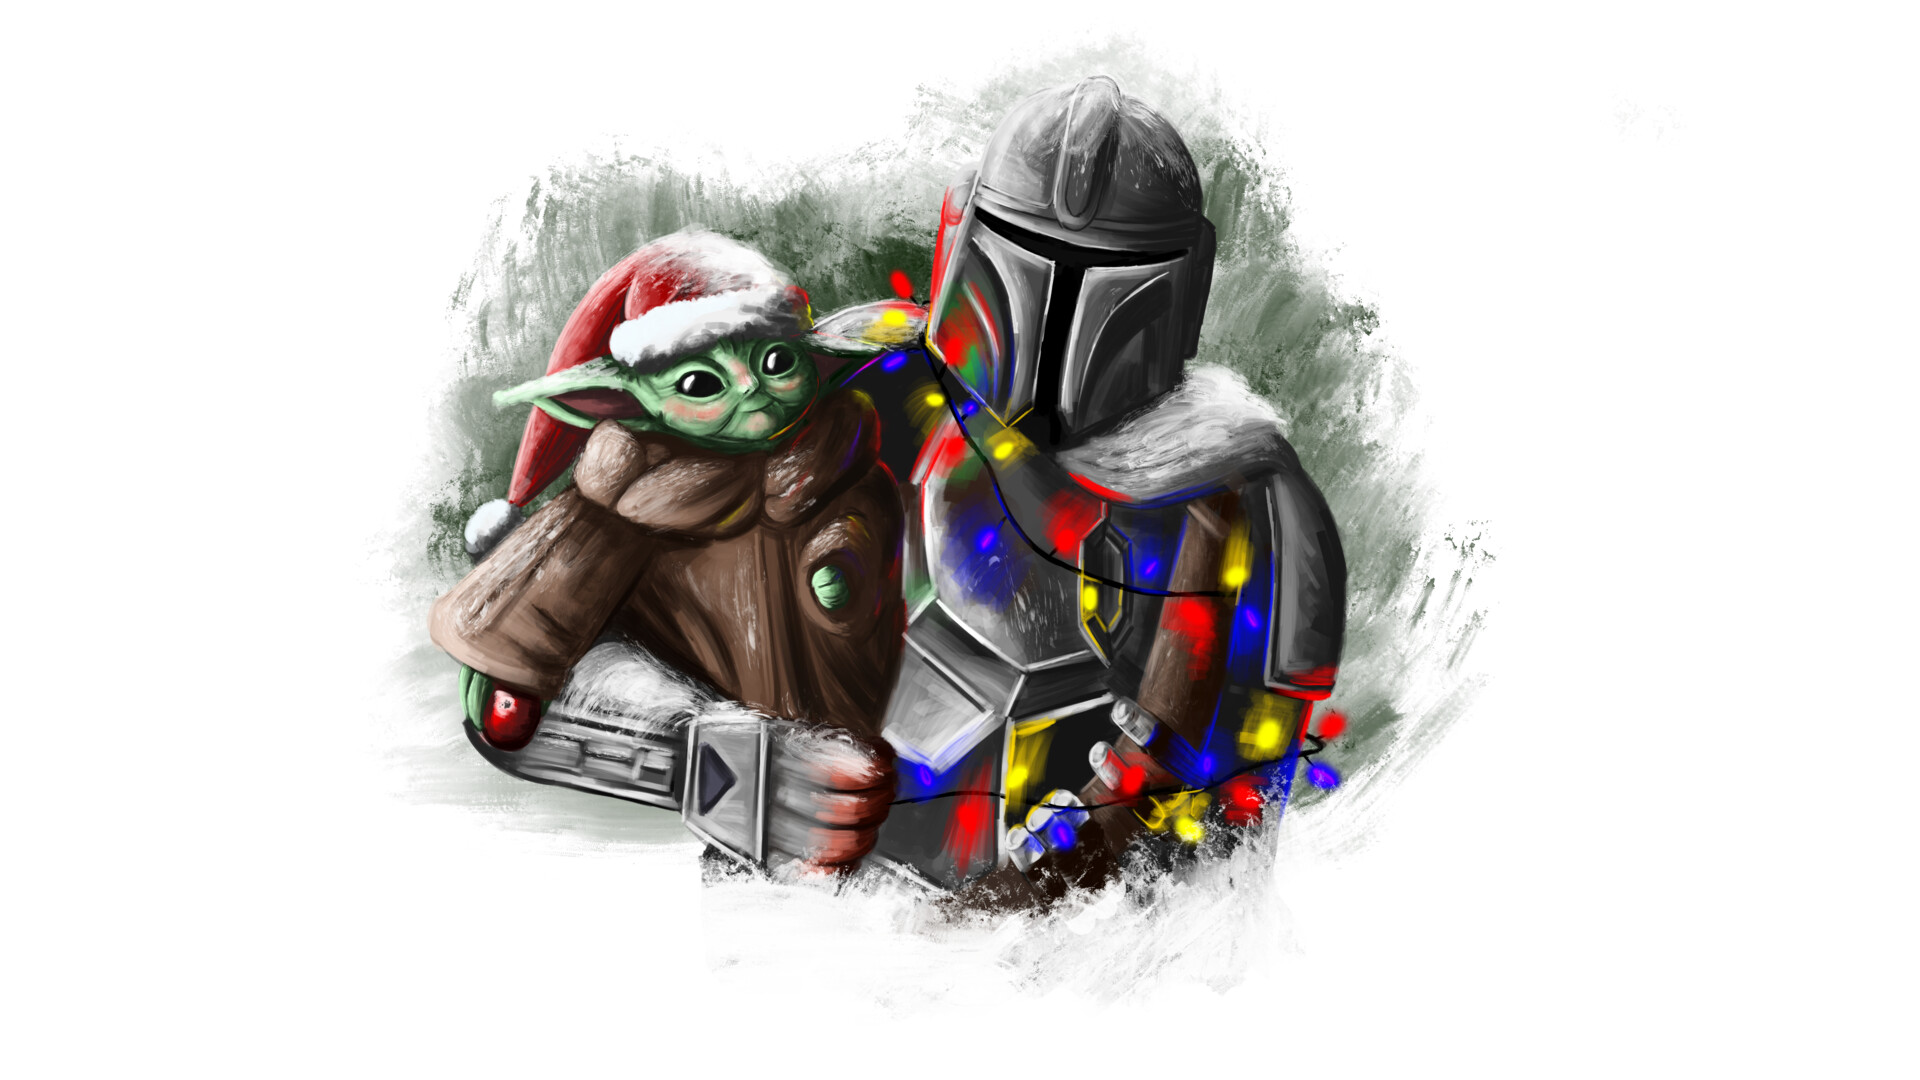 The Mandalorian and the Child at Christmas Time